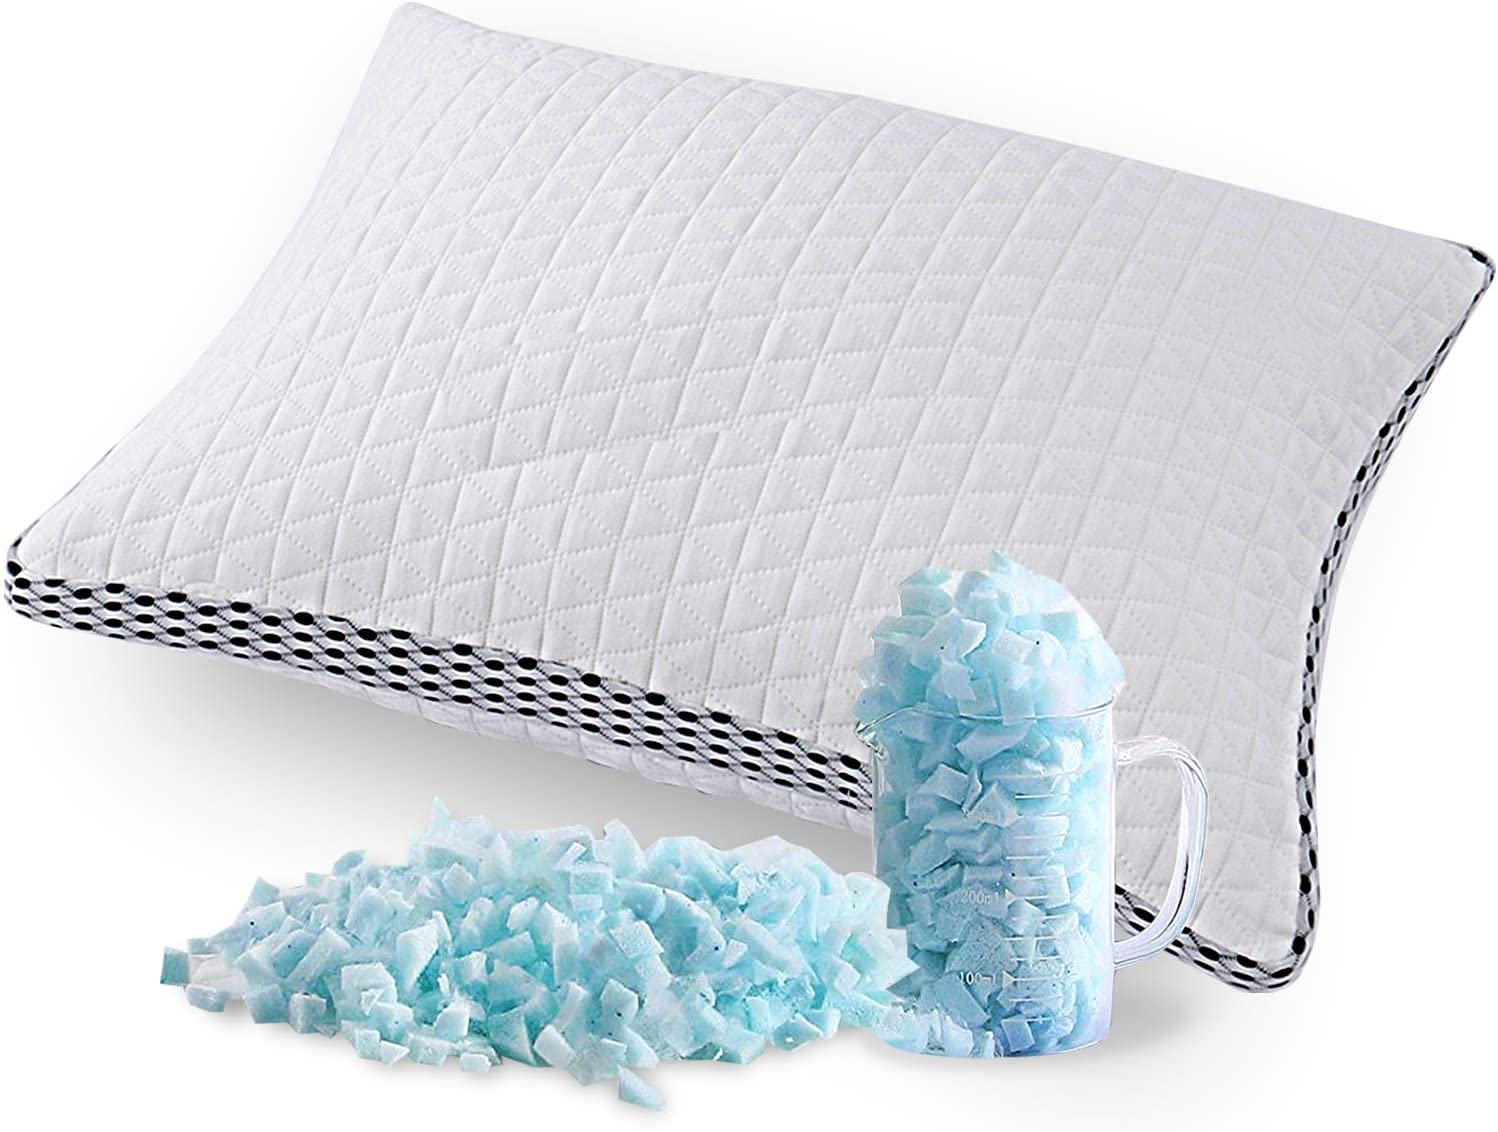 How long do Bamboo Cooling Pillow stay cool?